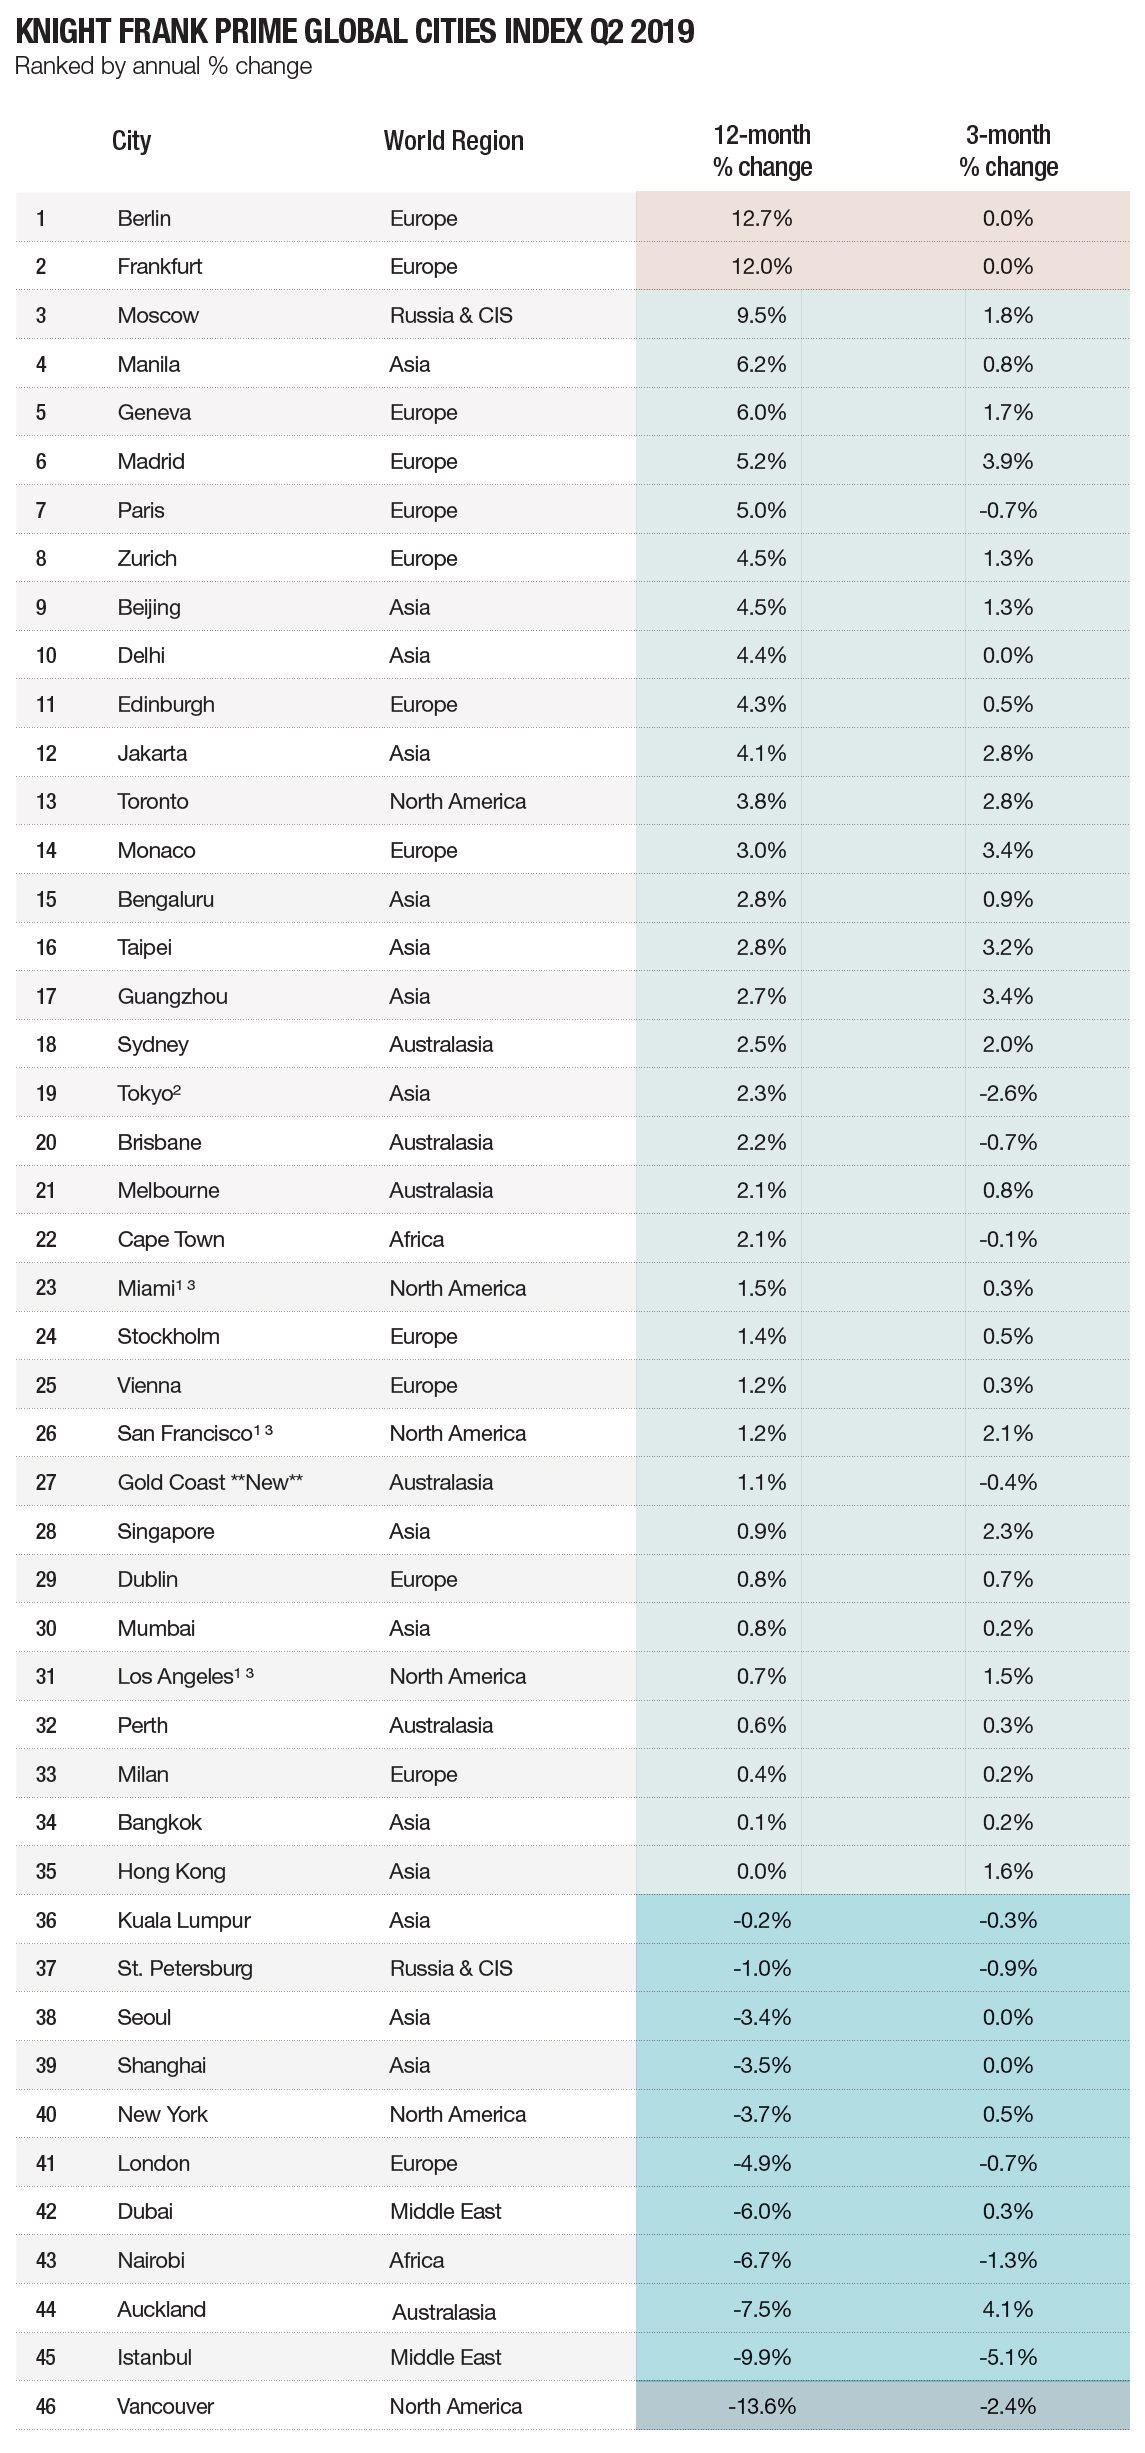 Knight-Frank-Prime-Global-Cities-Index-Q2-2019.jpg